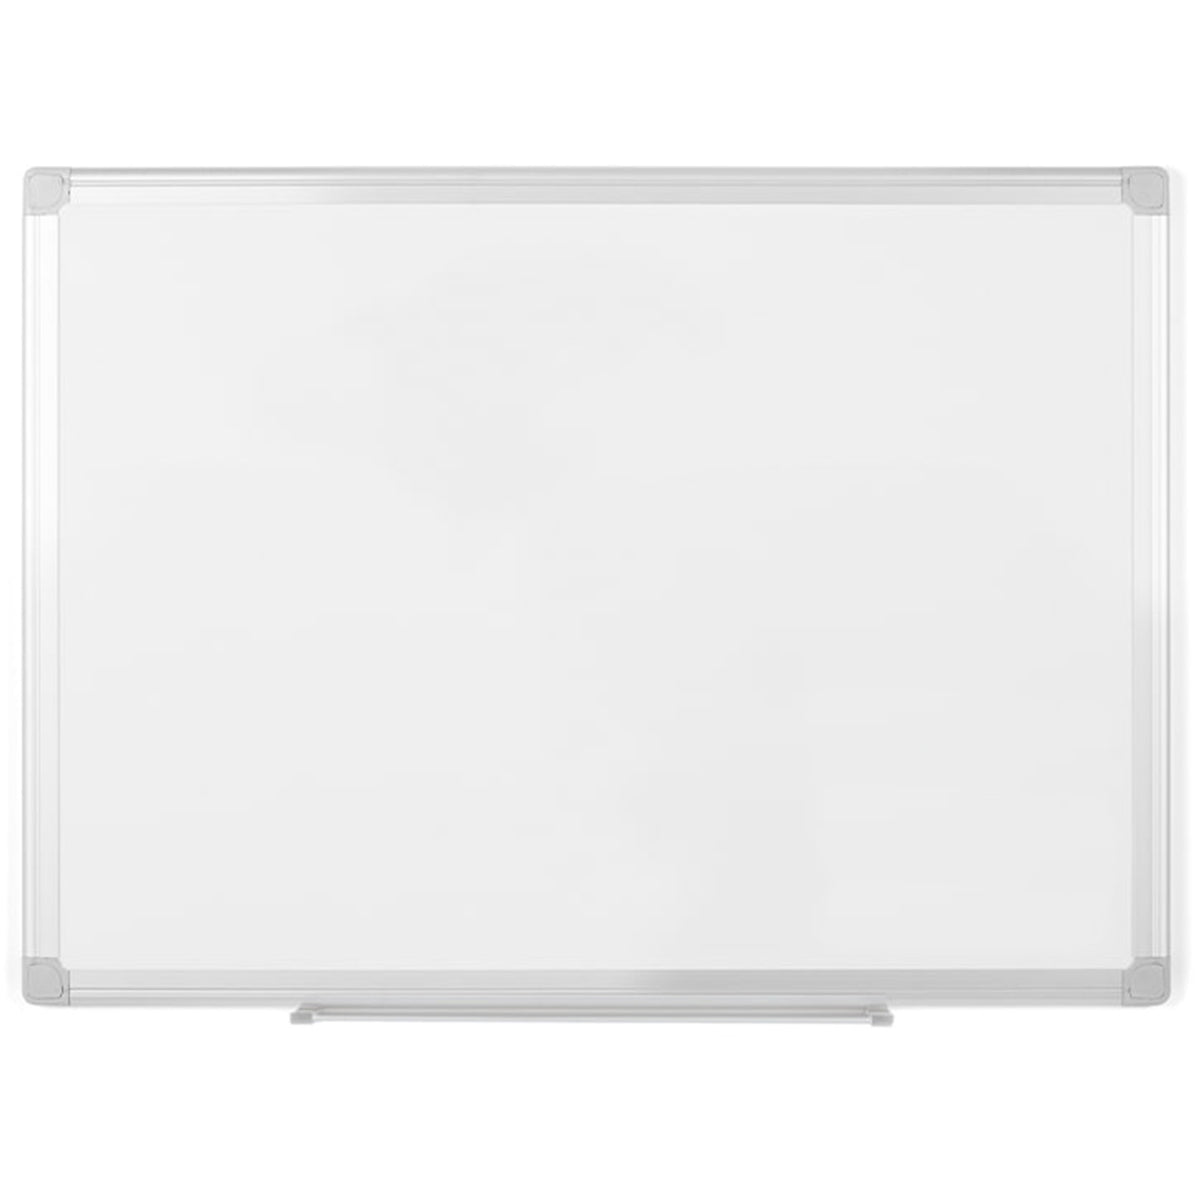 MA2107790 Earth Series Magnetic Laquered Steel Dry Erase Board, 100% Recycled Frame, Snap-On Marker Tray, 48" x 96", Aluminum Frame by MasterVision